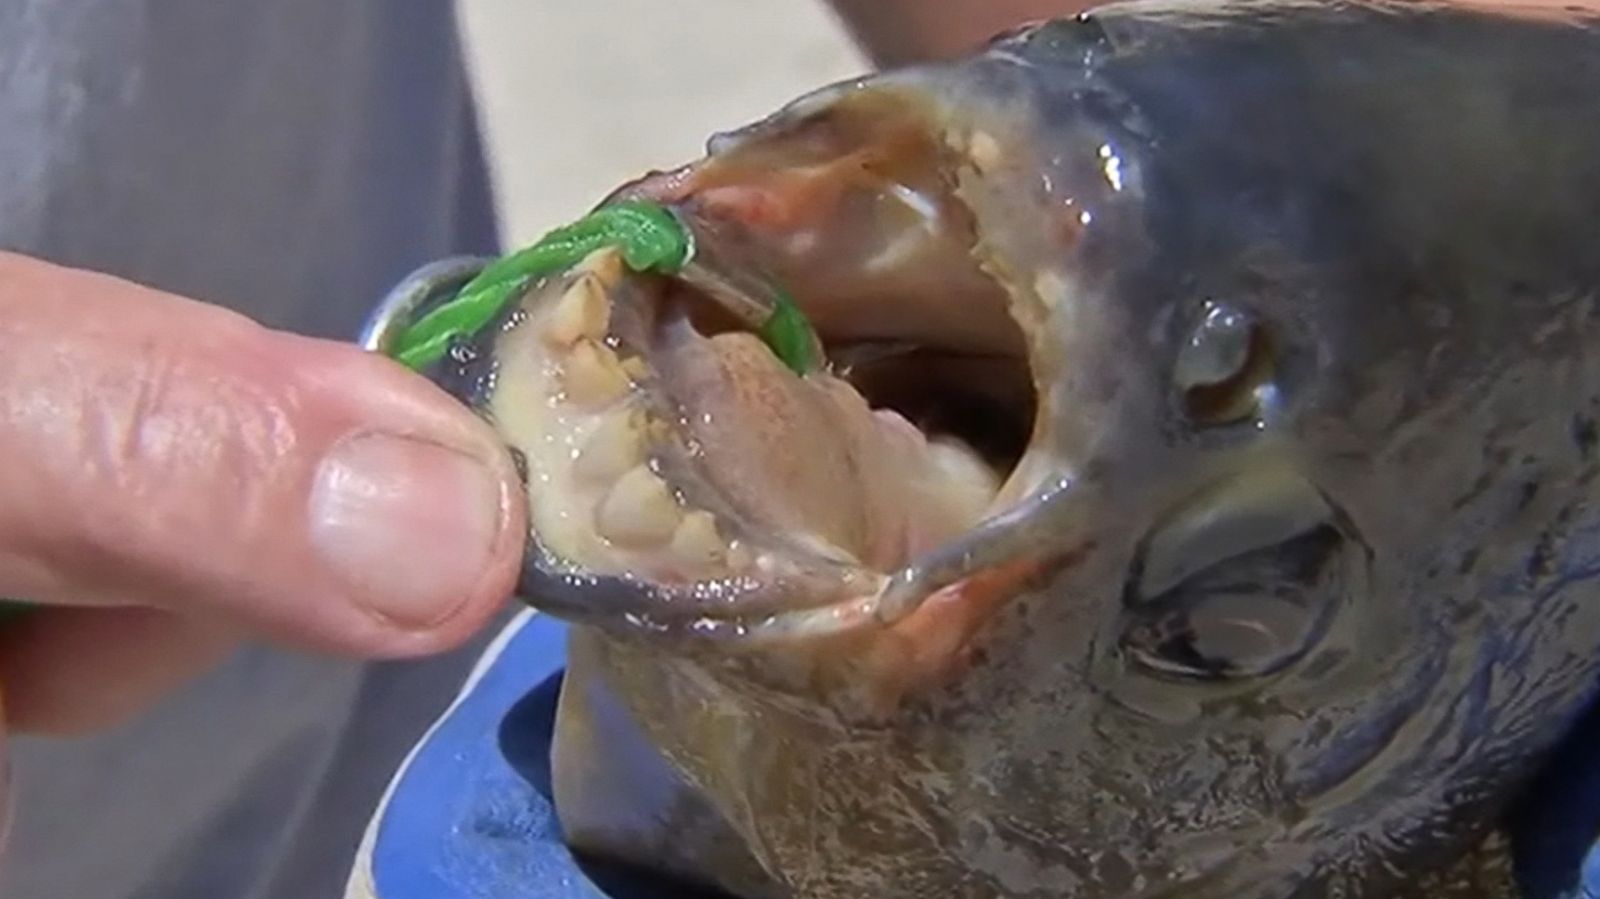 Rare ian Fish With Human-Like Teeth Caught in a New Jersey